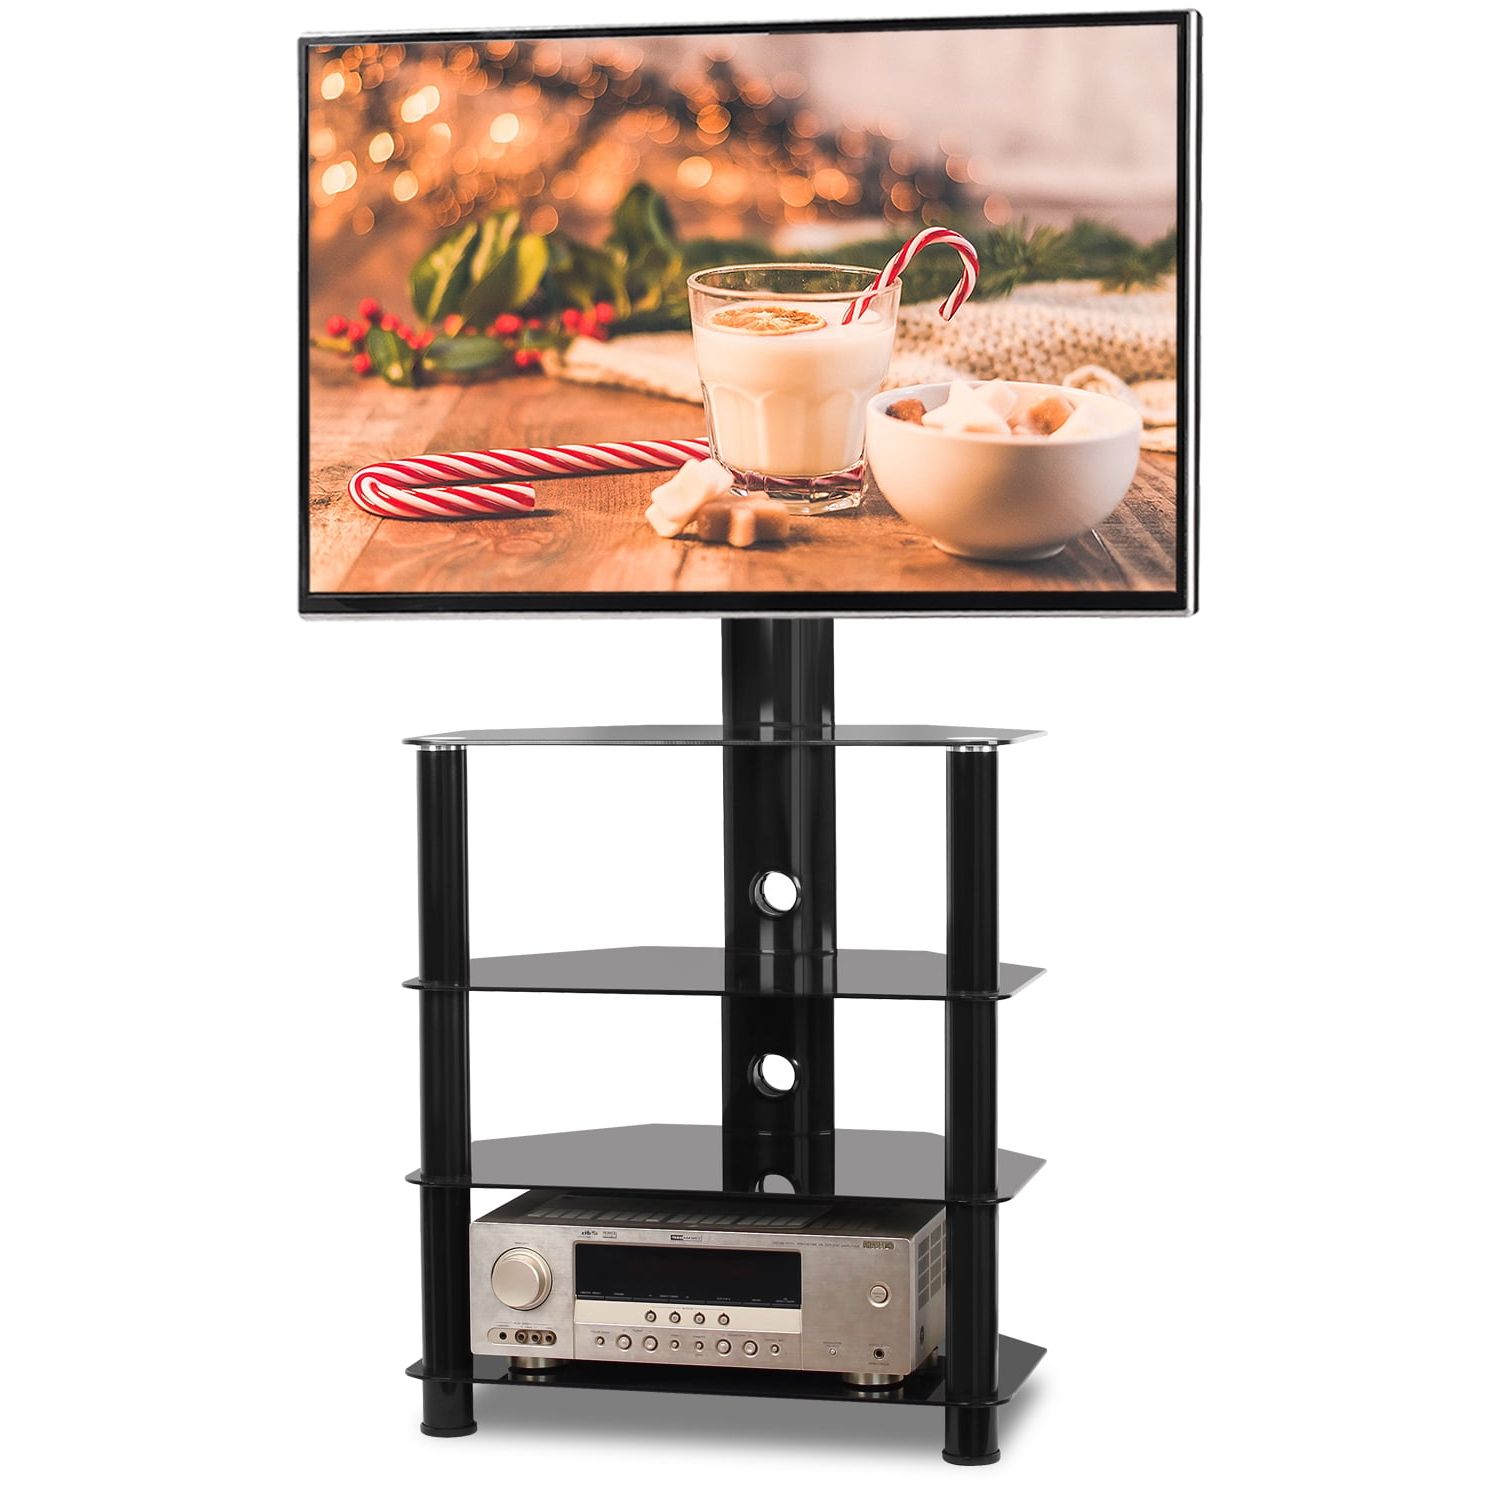 Most Recent Modern Floor Black Glass Tv Stand For 32" 55" Flat Screen Lcd Led Tvs Regarding Glass Shelves Tv Stands (View 14 of 15)